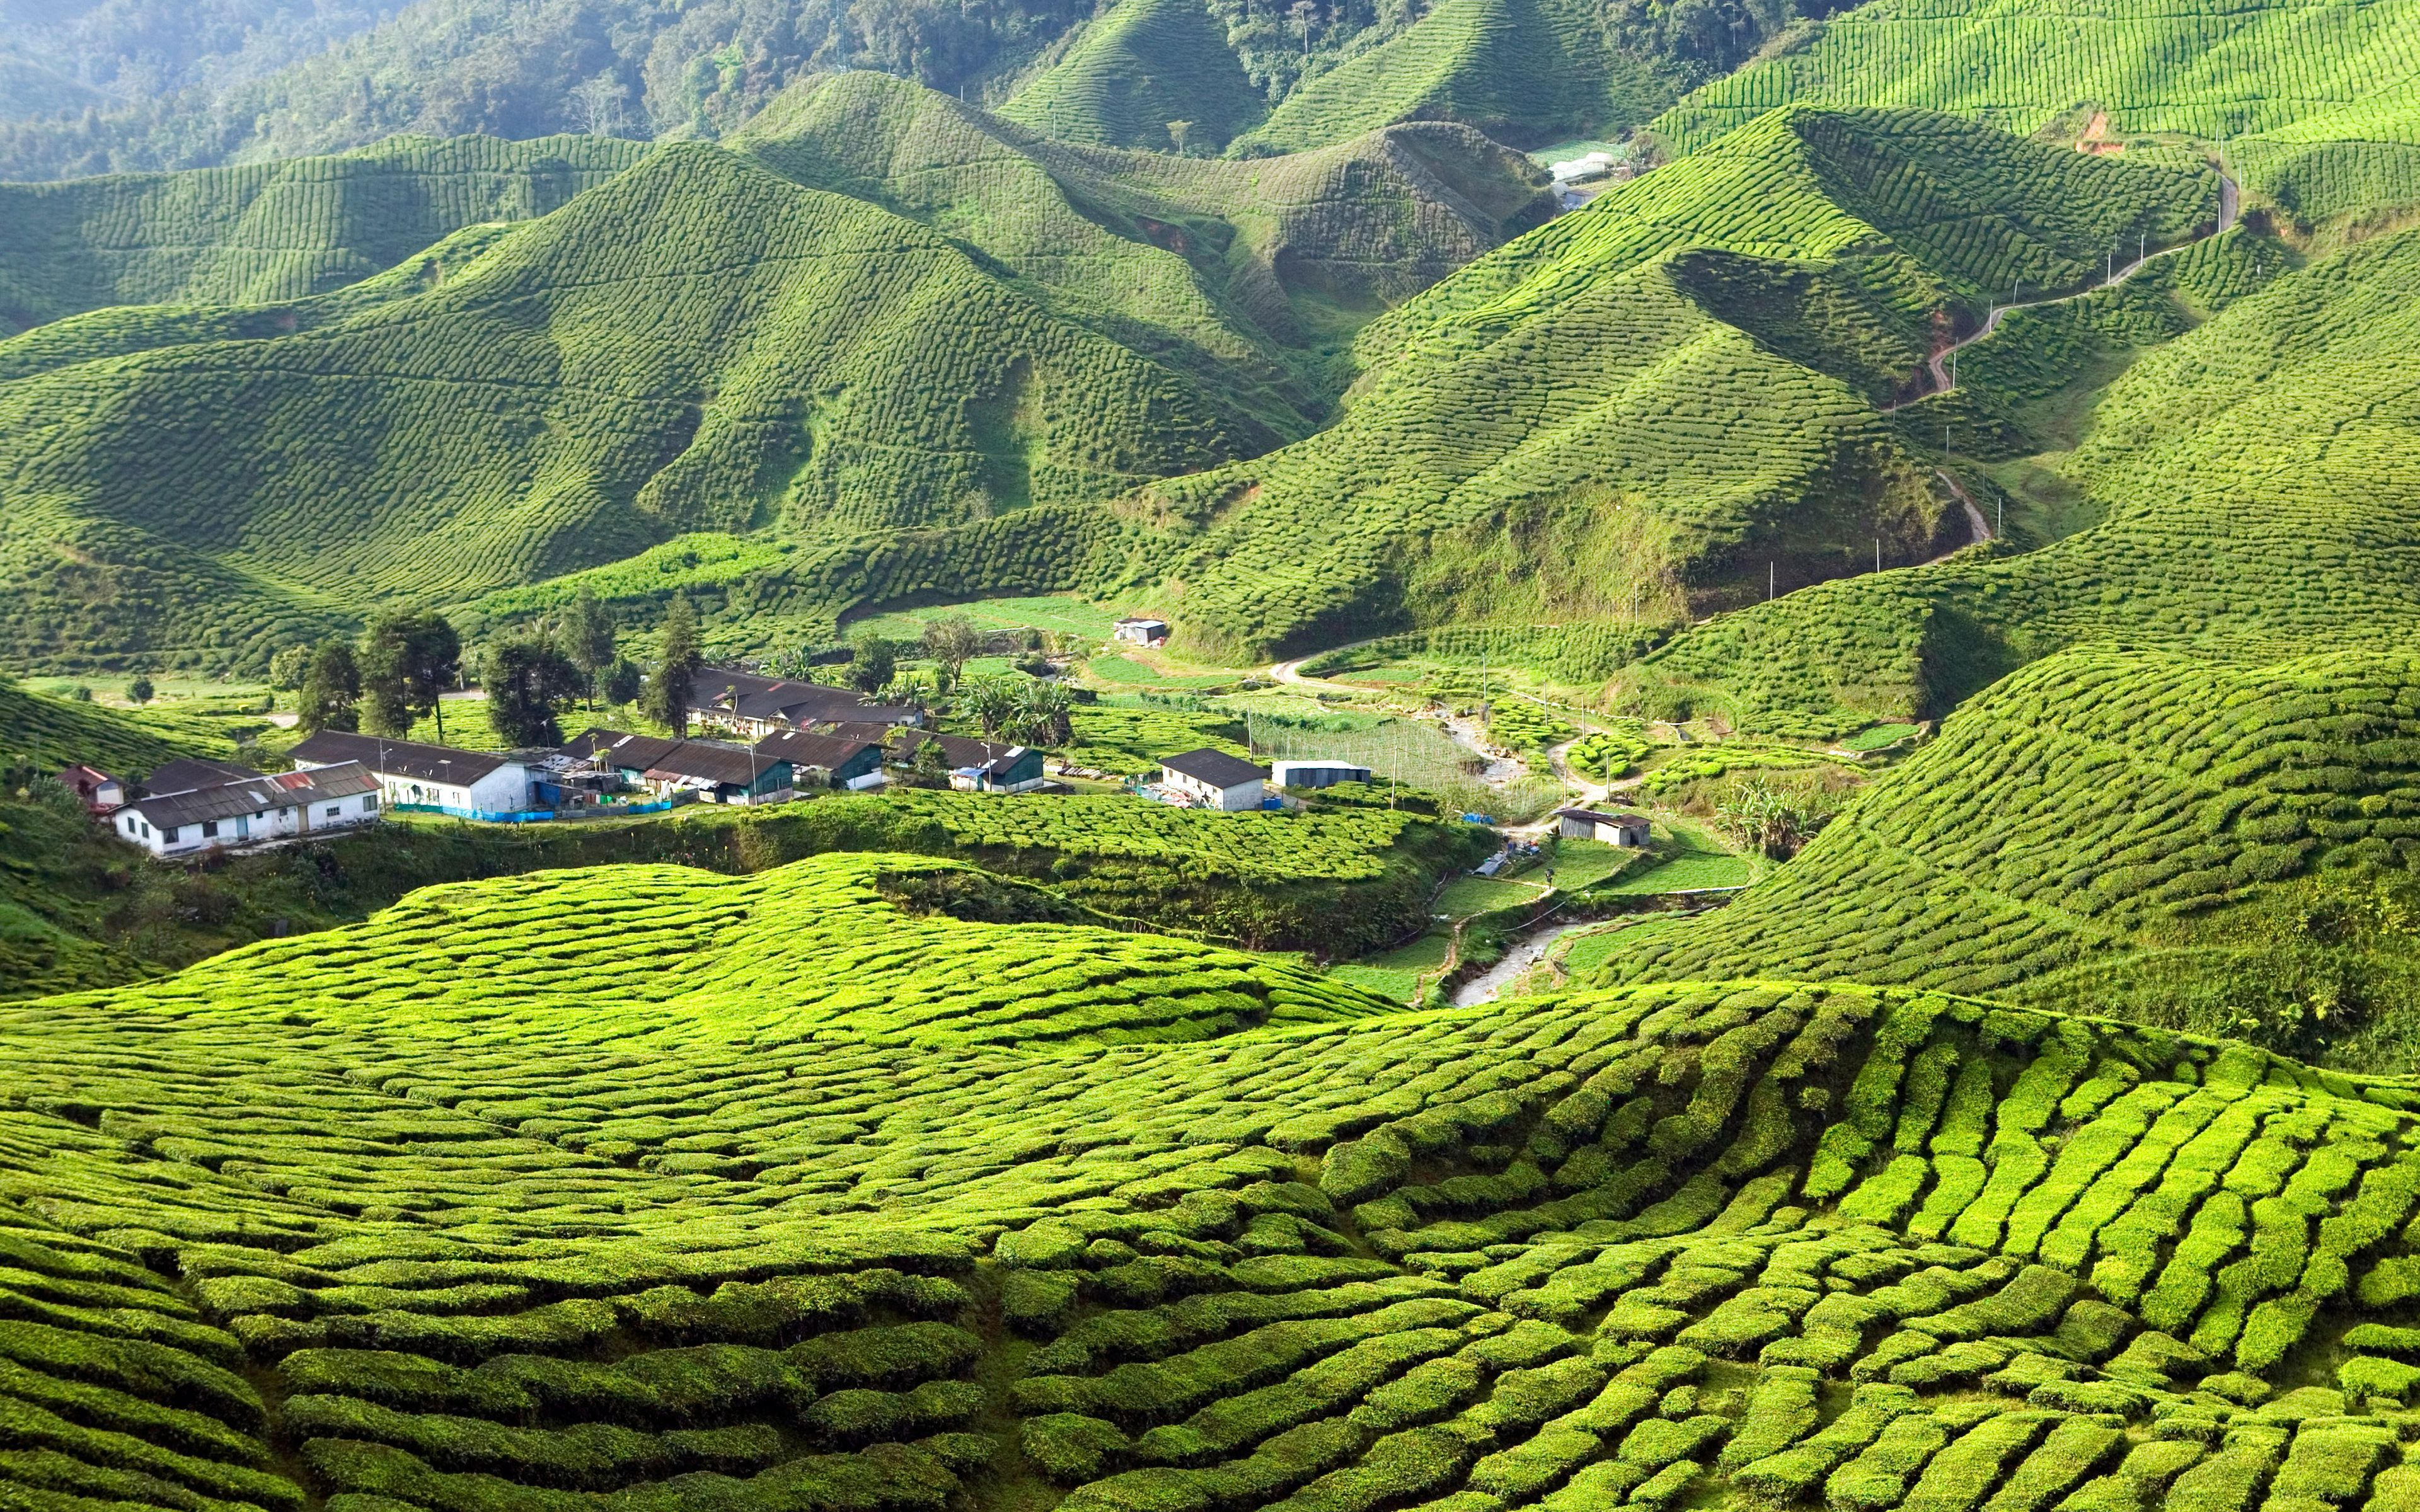 Download wallpaper Cameron Highlands, 4k, tea plantations, hills, summer, Malaysia, Asia for desktop with resolution 3840x2400. High Quality HD picture wallpaper